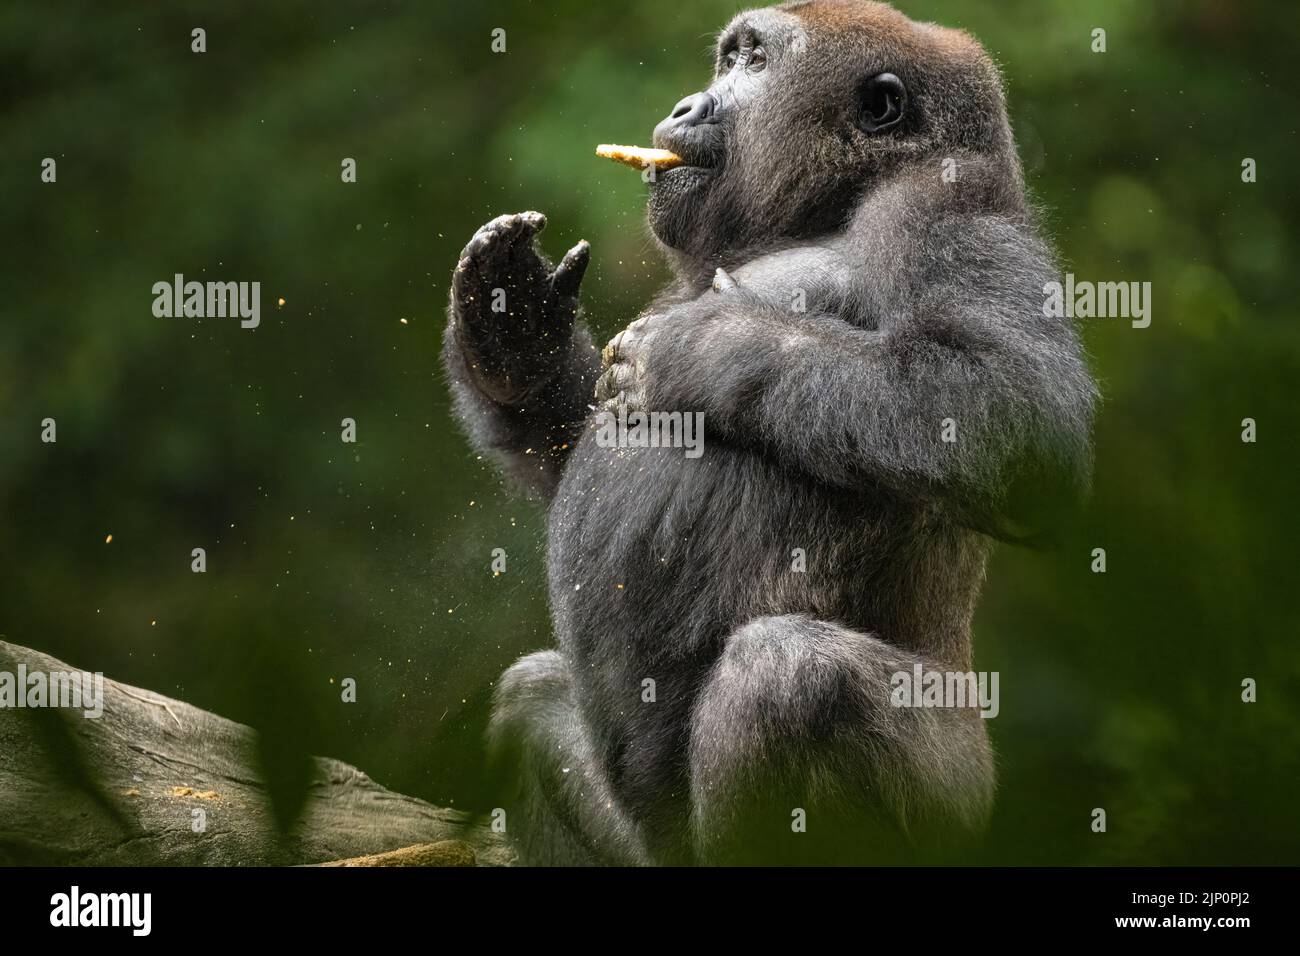 Western lowland gorilla beating his chest with food in his mouth at Zoo Atlanta in Atlanta, Georgia. (USA) Stock Photo